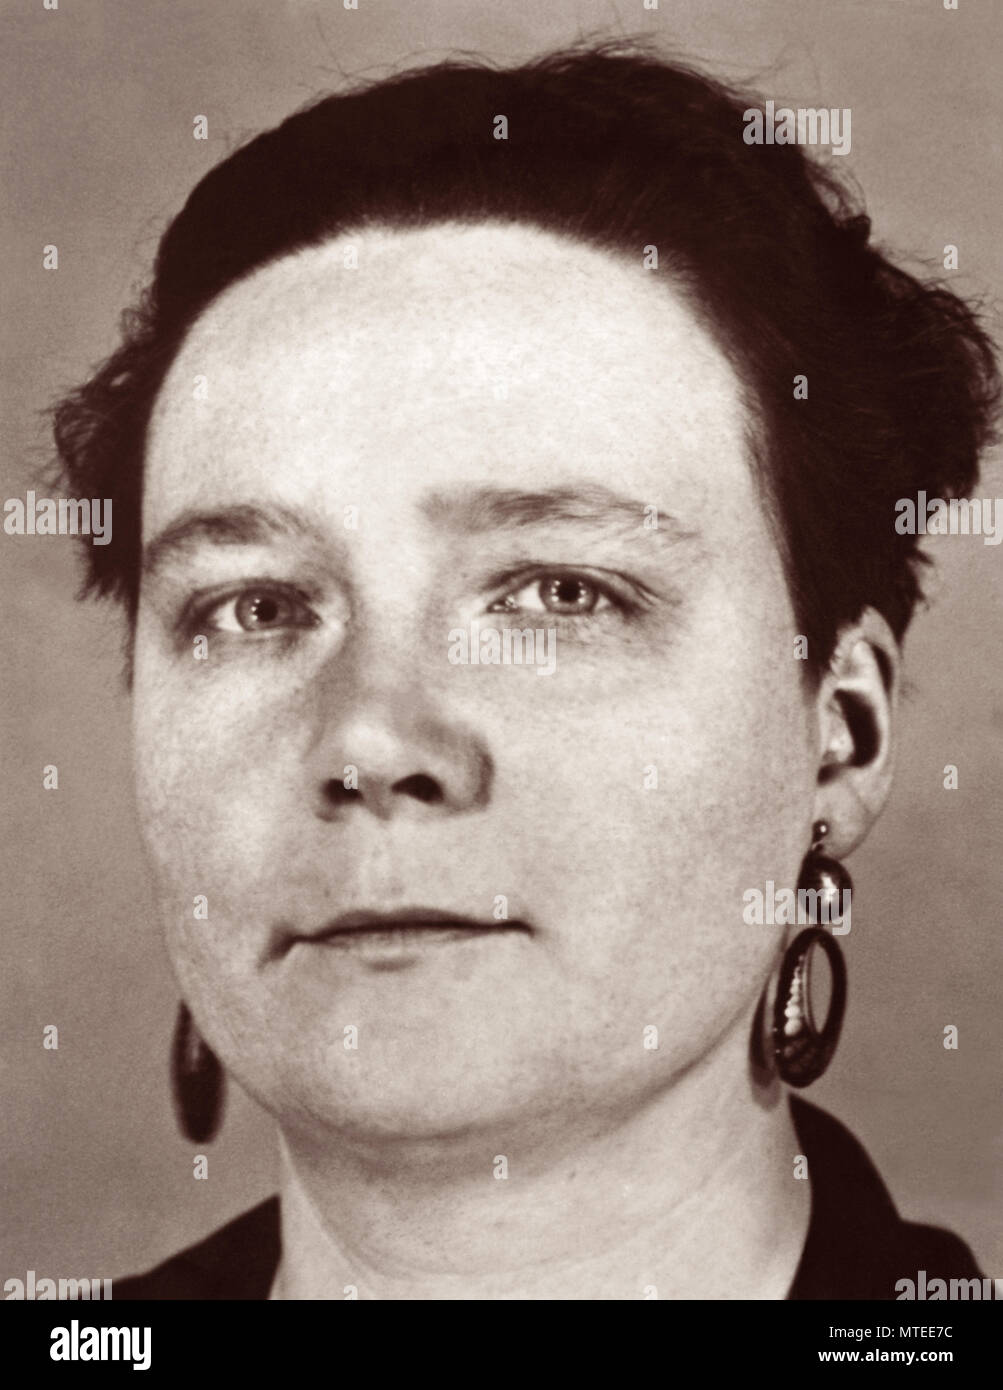 Dorothy Sayers (1893-1957), renowned English writer often considered one of the British authors informally known as 'The Inklings' (due to her friendship with C.S. Lewis and Charles Williams) in a portrait from 1928. Stock Photo